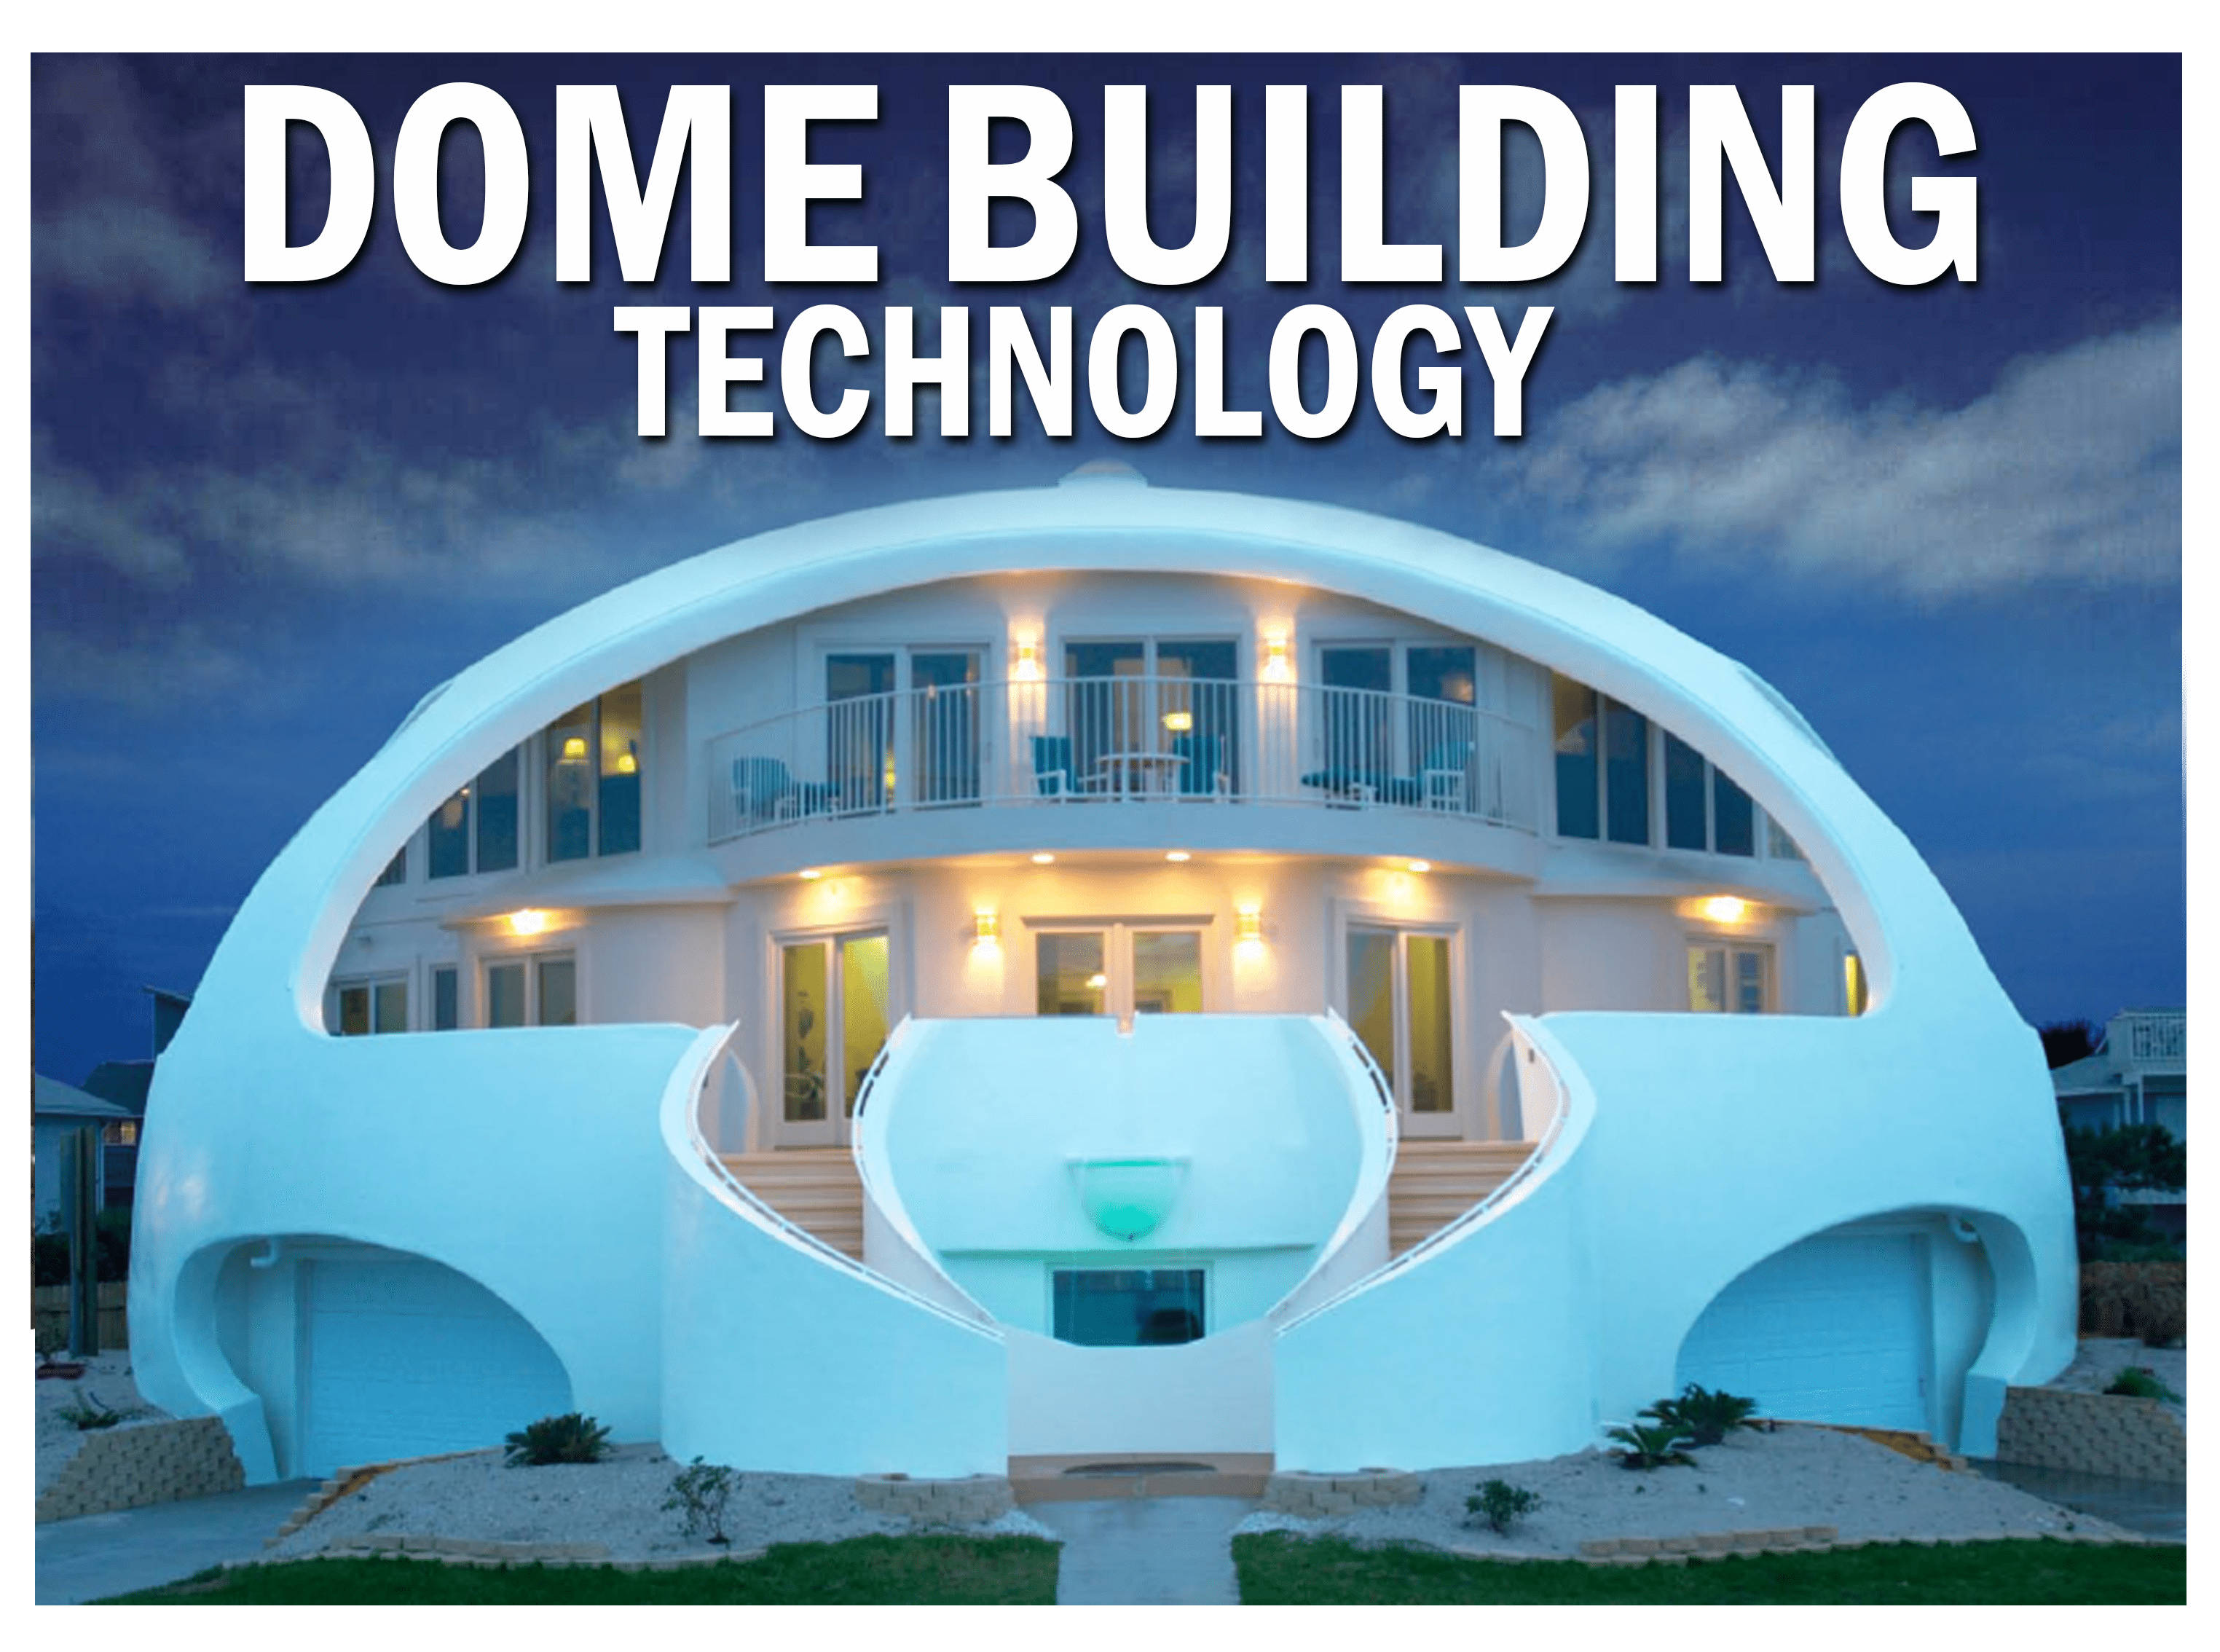 The Modern Home - Dome Building Technology